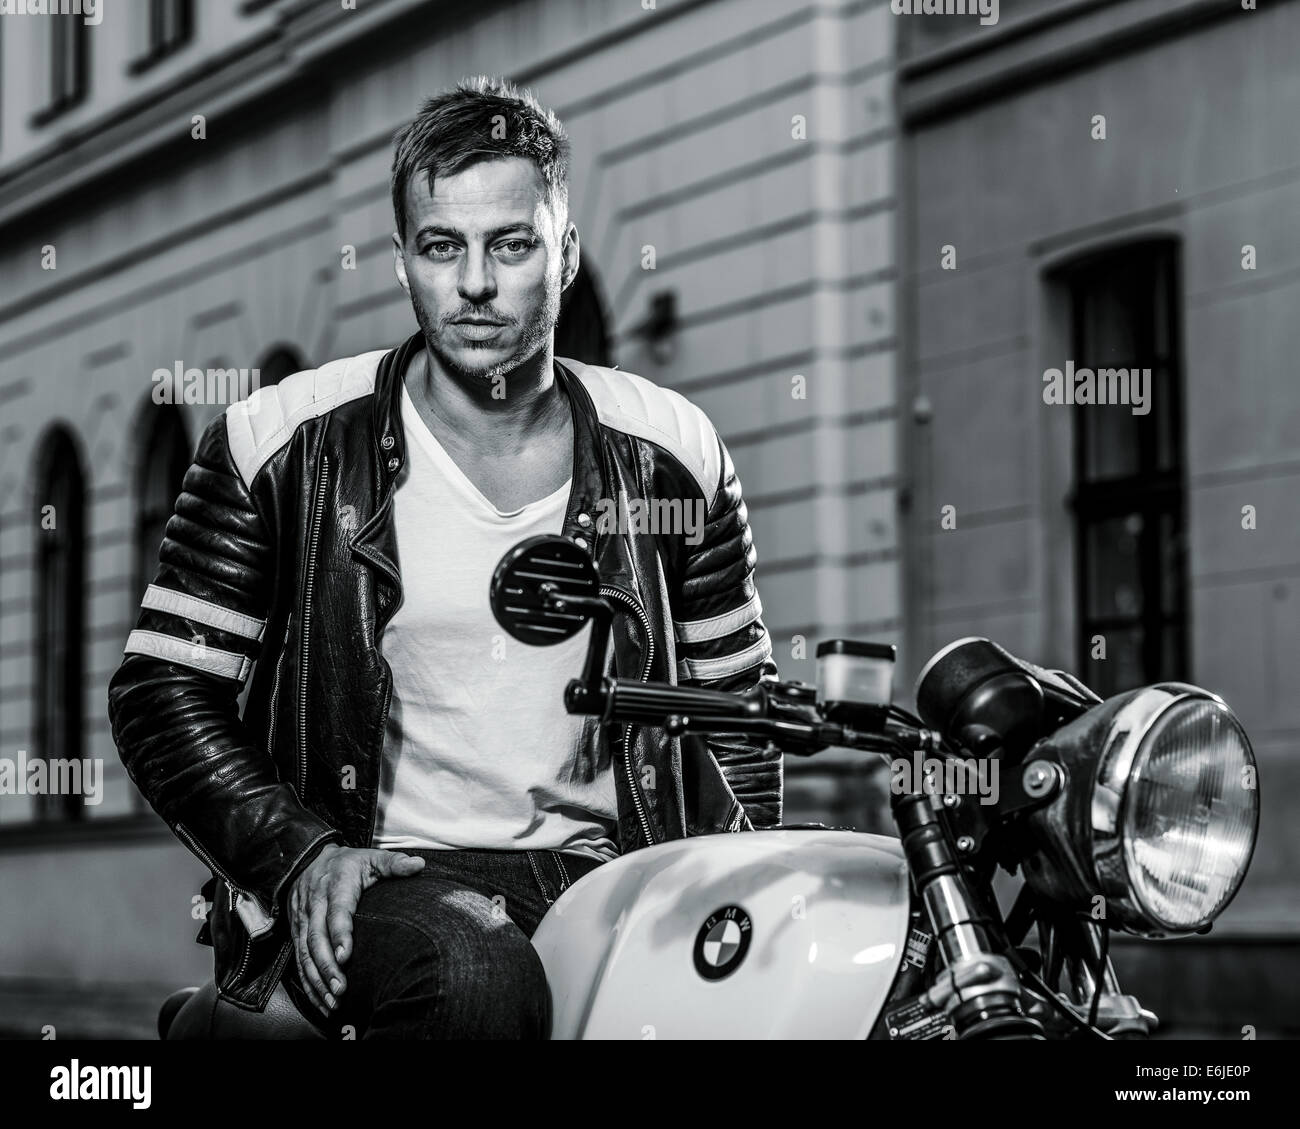 EXCLUSIVE: The actor Tom Wlaschiha during a exclusive photo shoot with a BMW RT80 (Cafe Racer) bike on August 09, 2014 in Berlin, Germany. Photo: picture alliance / Robert Schlesinger Stock Photo